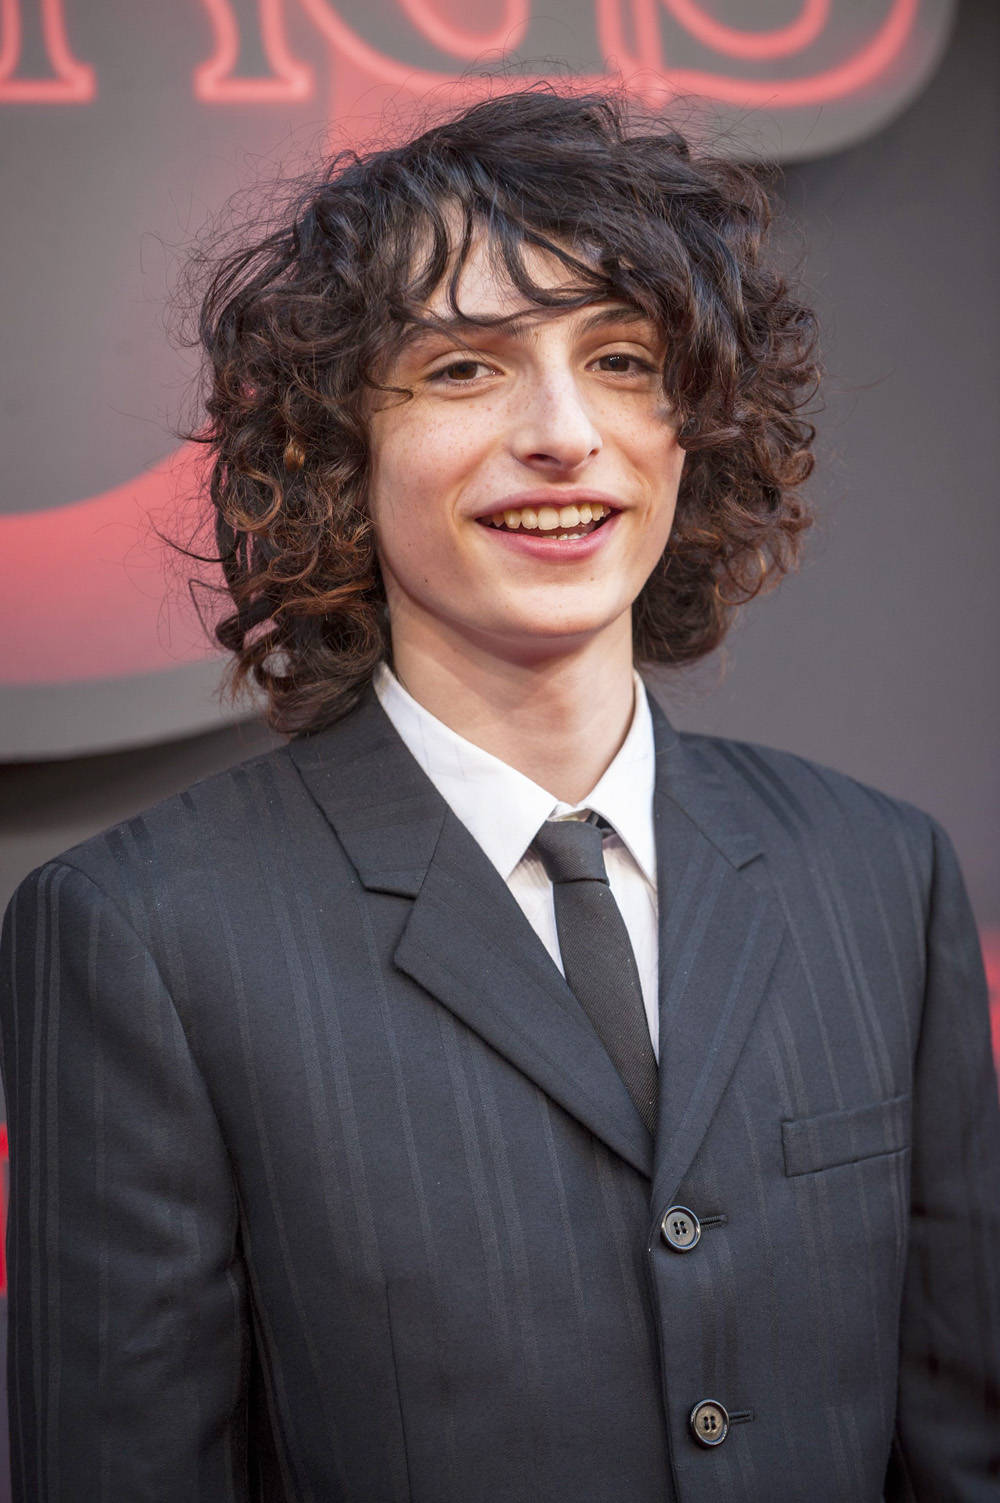 Finn Wolfhard Smiling On Stage Wallpaper